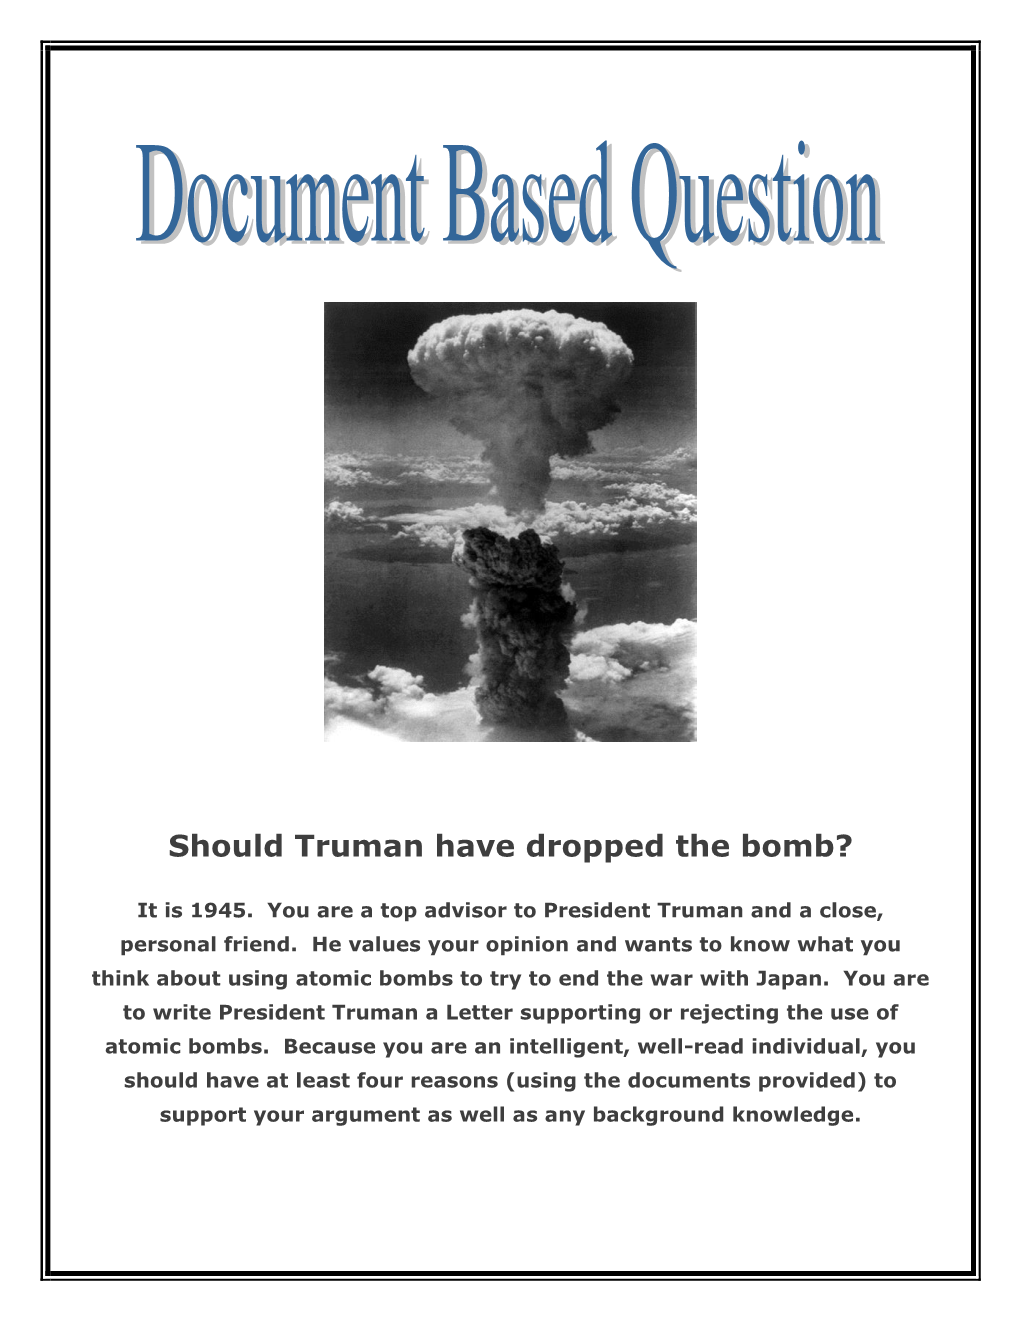 Should Truman Have Dropped the Bomb?